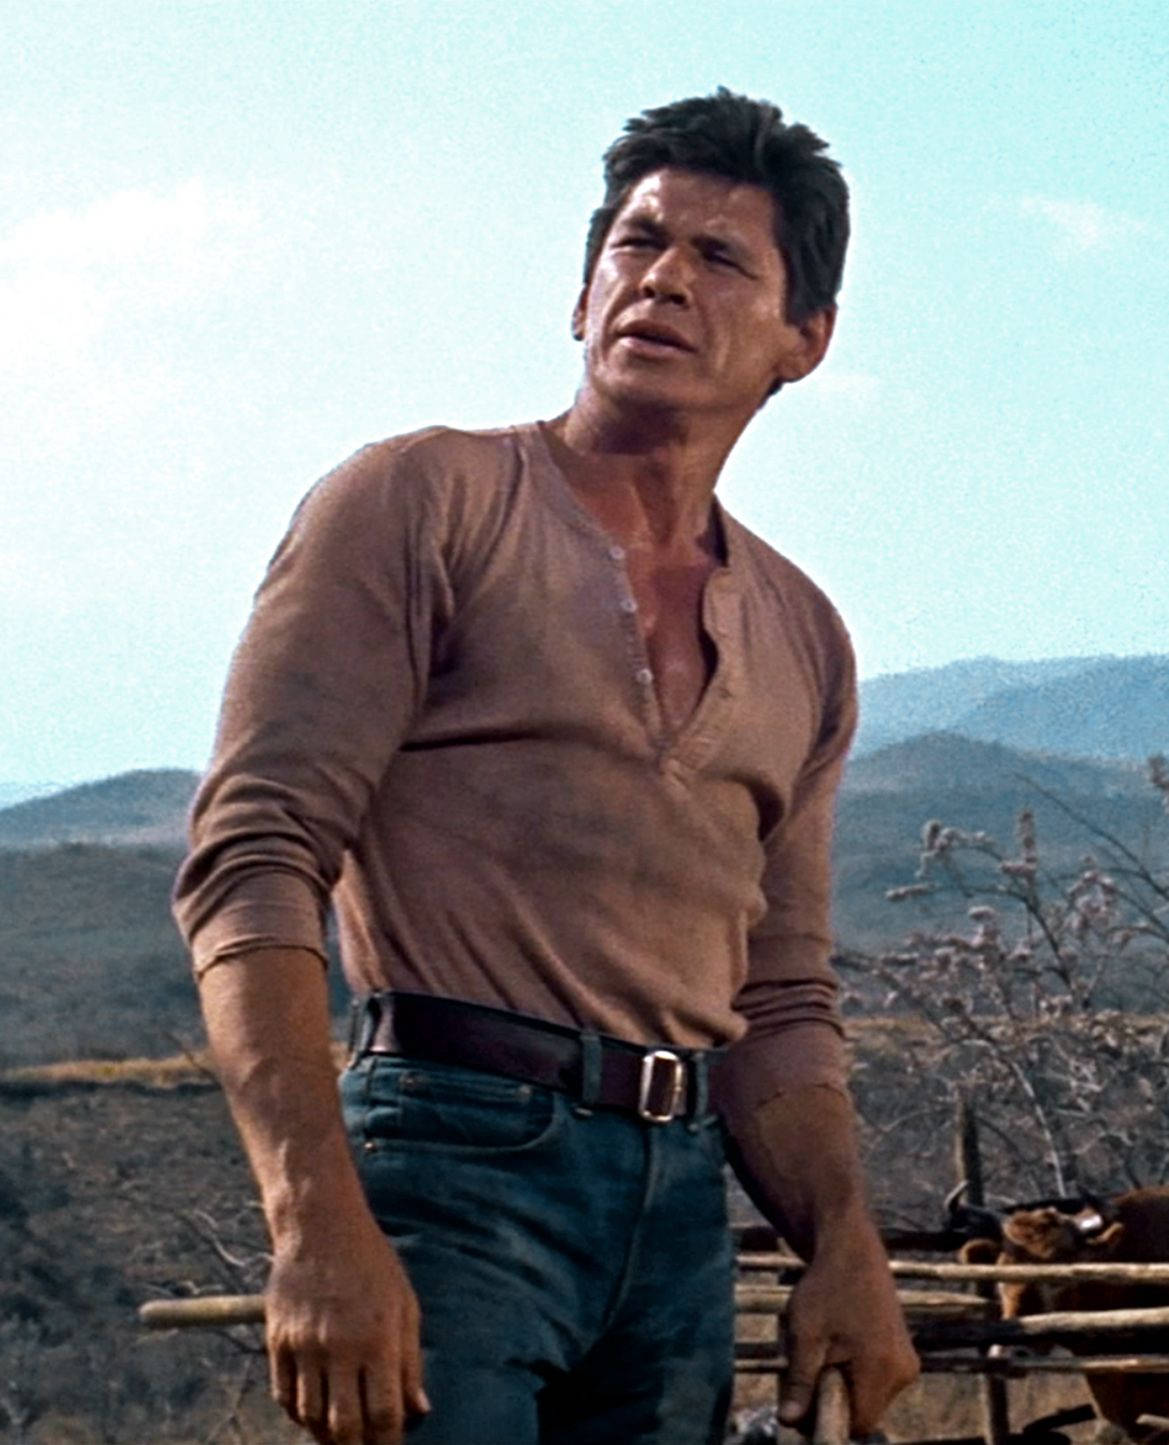 charles bronson physique